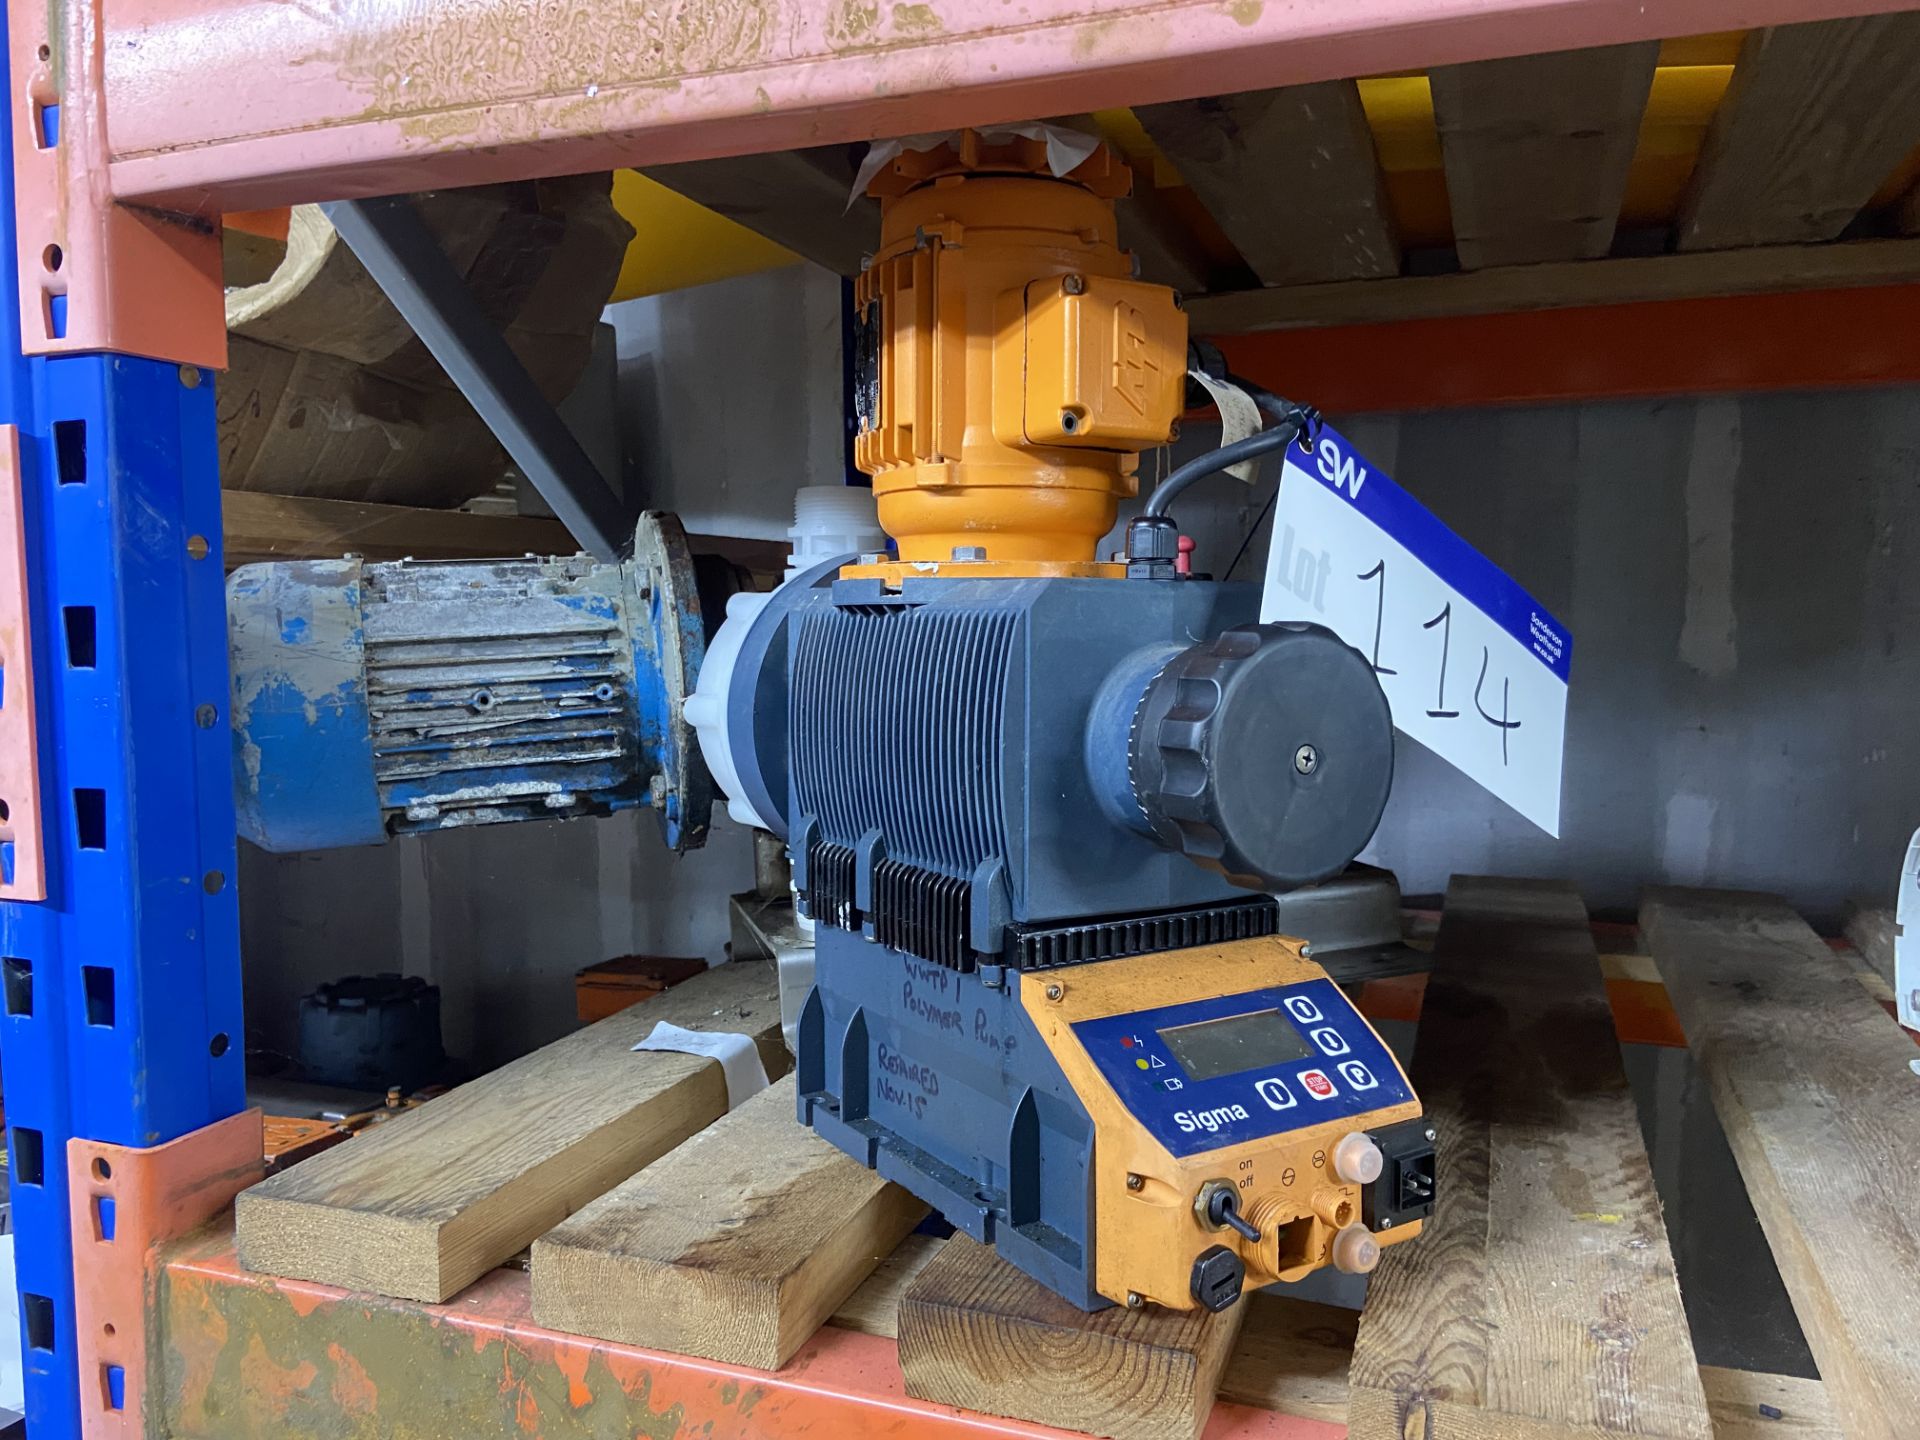 Promnent 82CAHM07120PVT0170UA11000 Sigma Pump, lot located in Bretherton, Lancashire, lot loaded